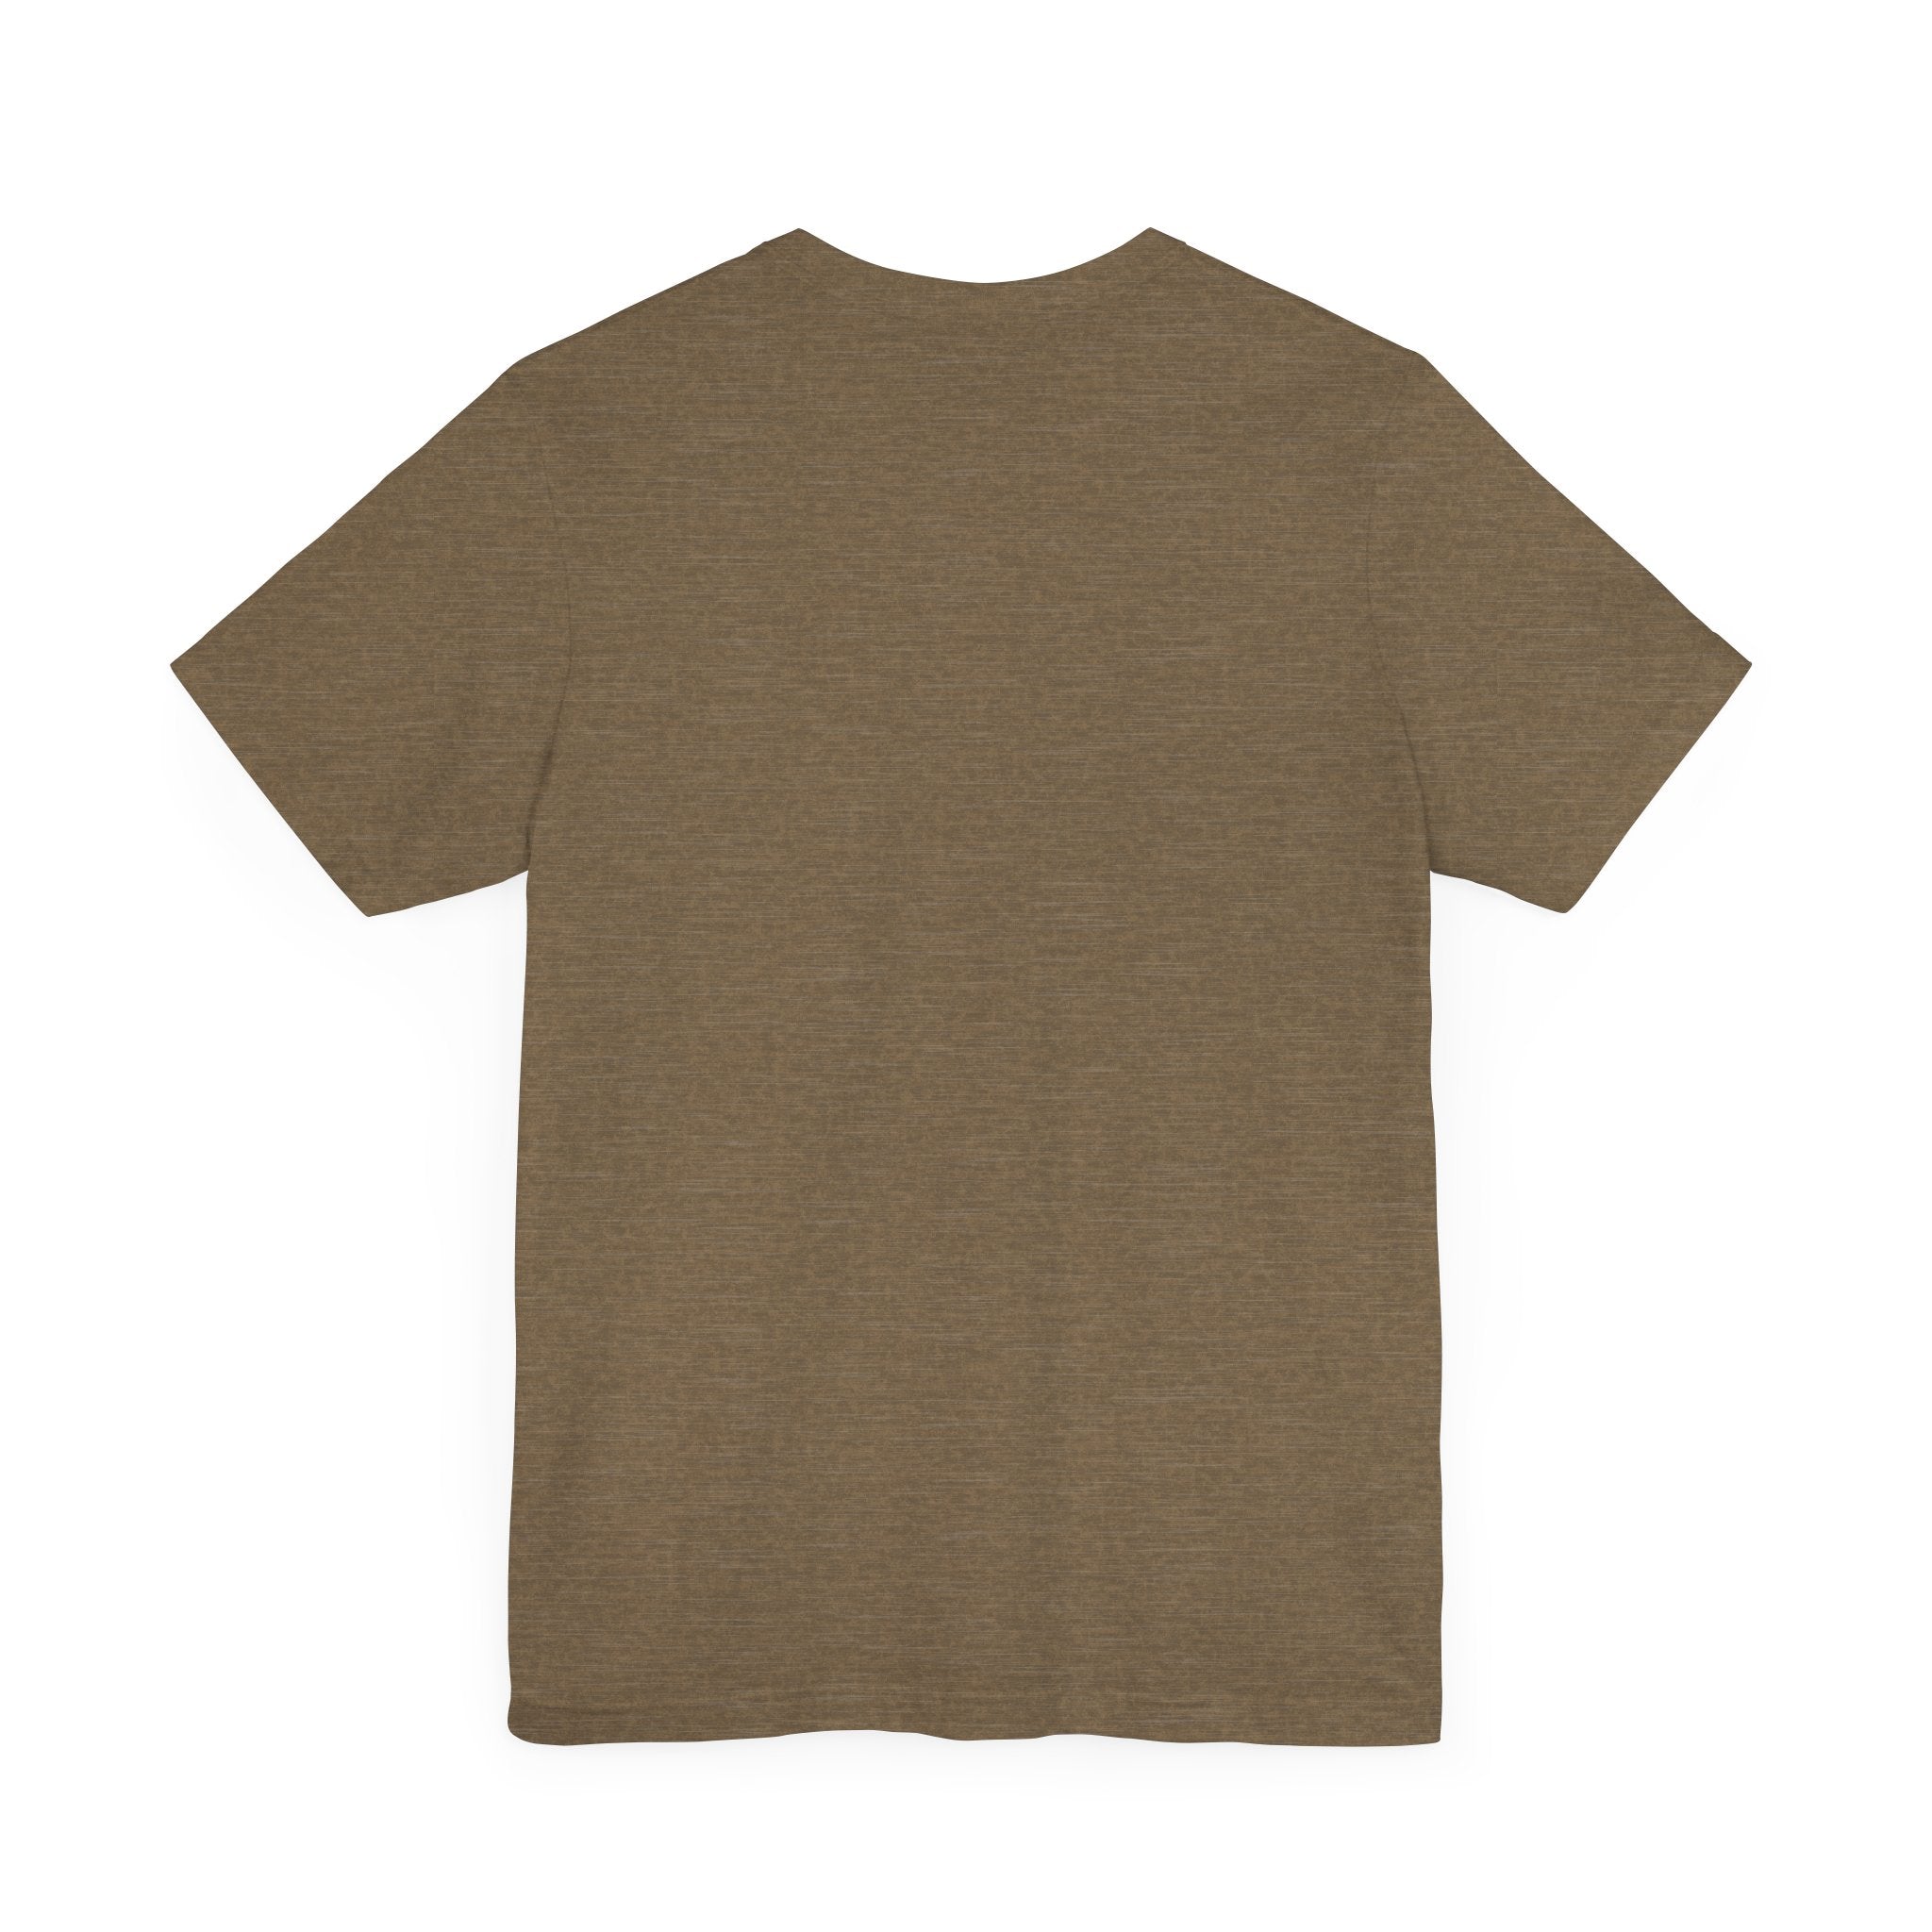 Direct-to-garment printed brown t shirt from Be Amazing - Bella & Canvas - Soulshinecreators - Unisex